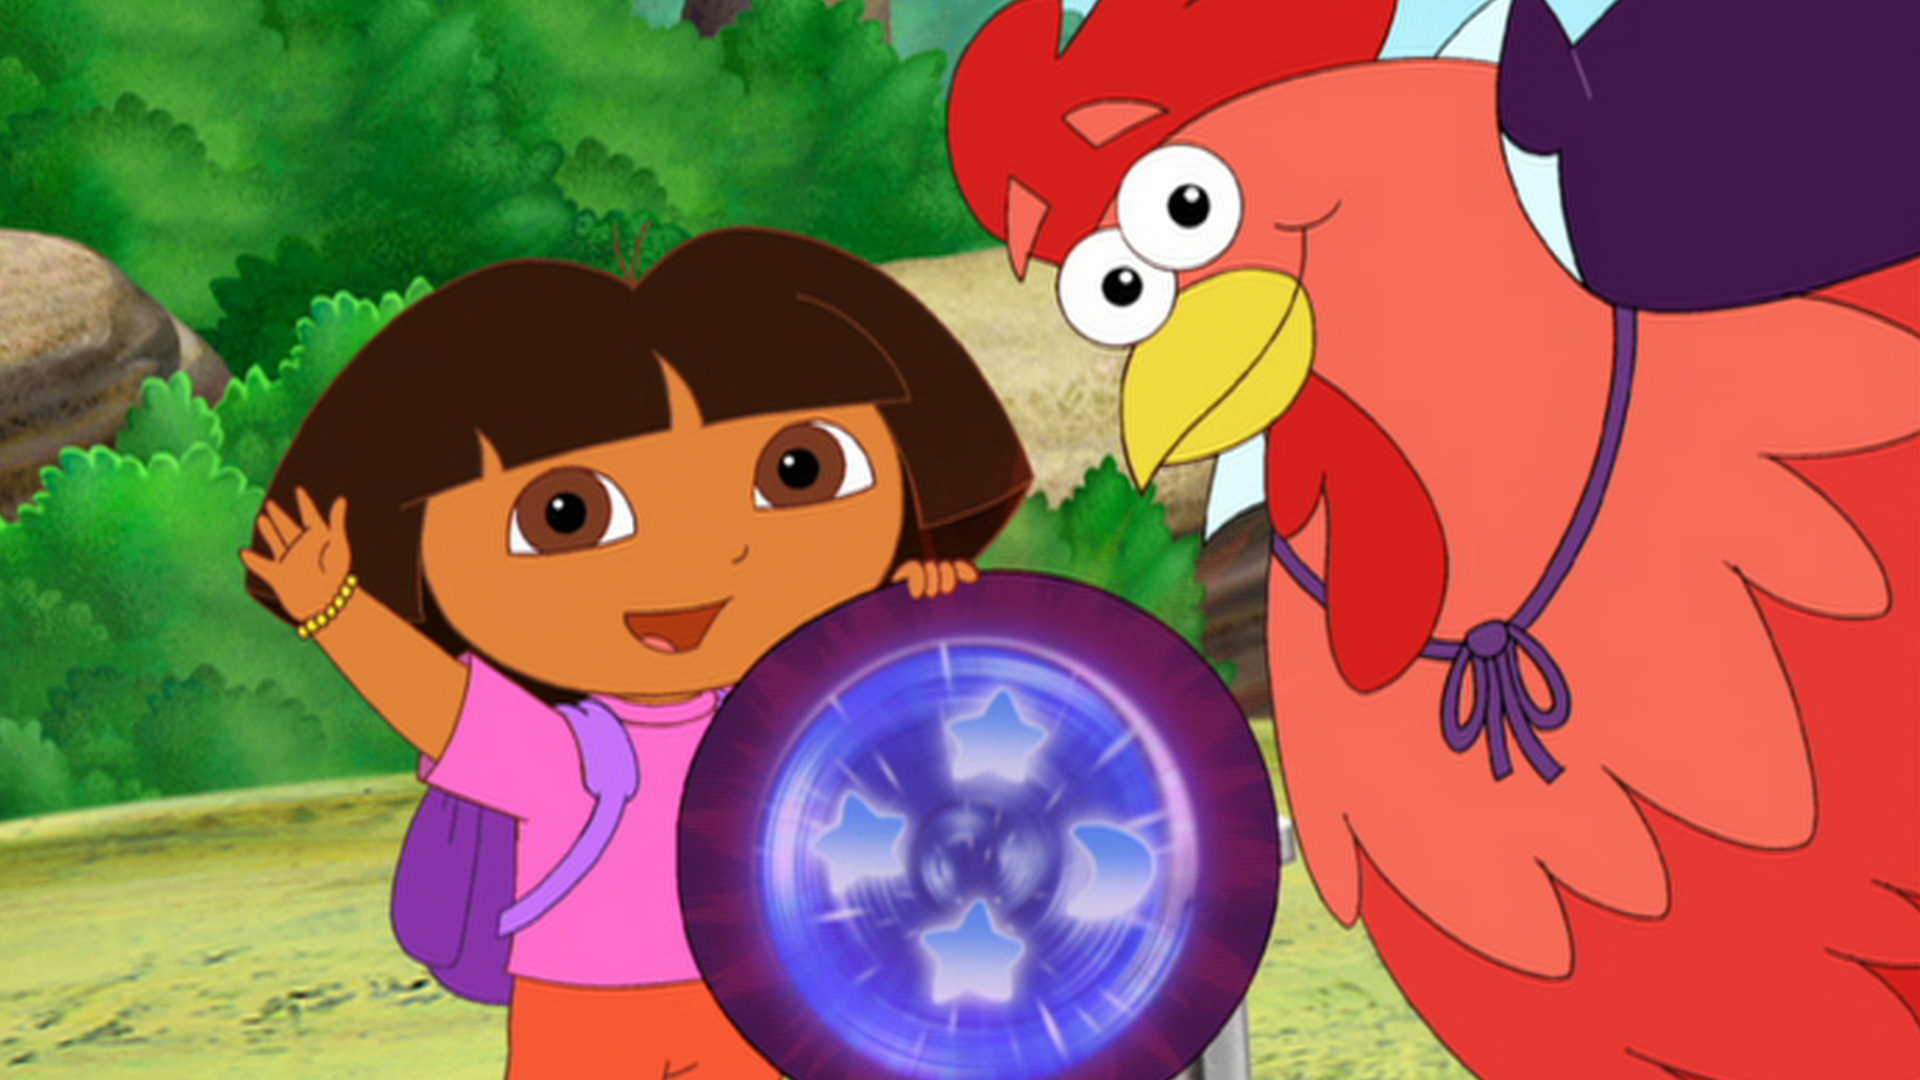 Watch Dora the Explorer Season 6 Episode 8: The Big Red Chicken's Magic  Wand - Full show on Paramount Plus